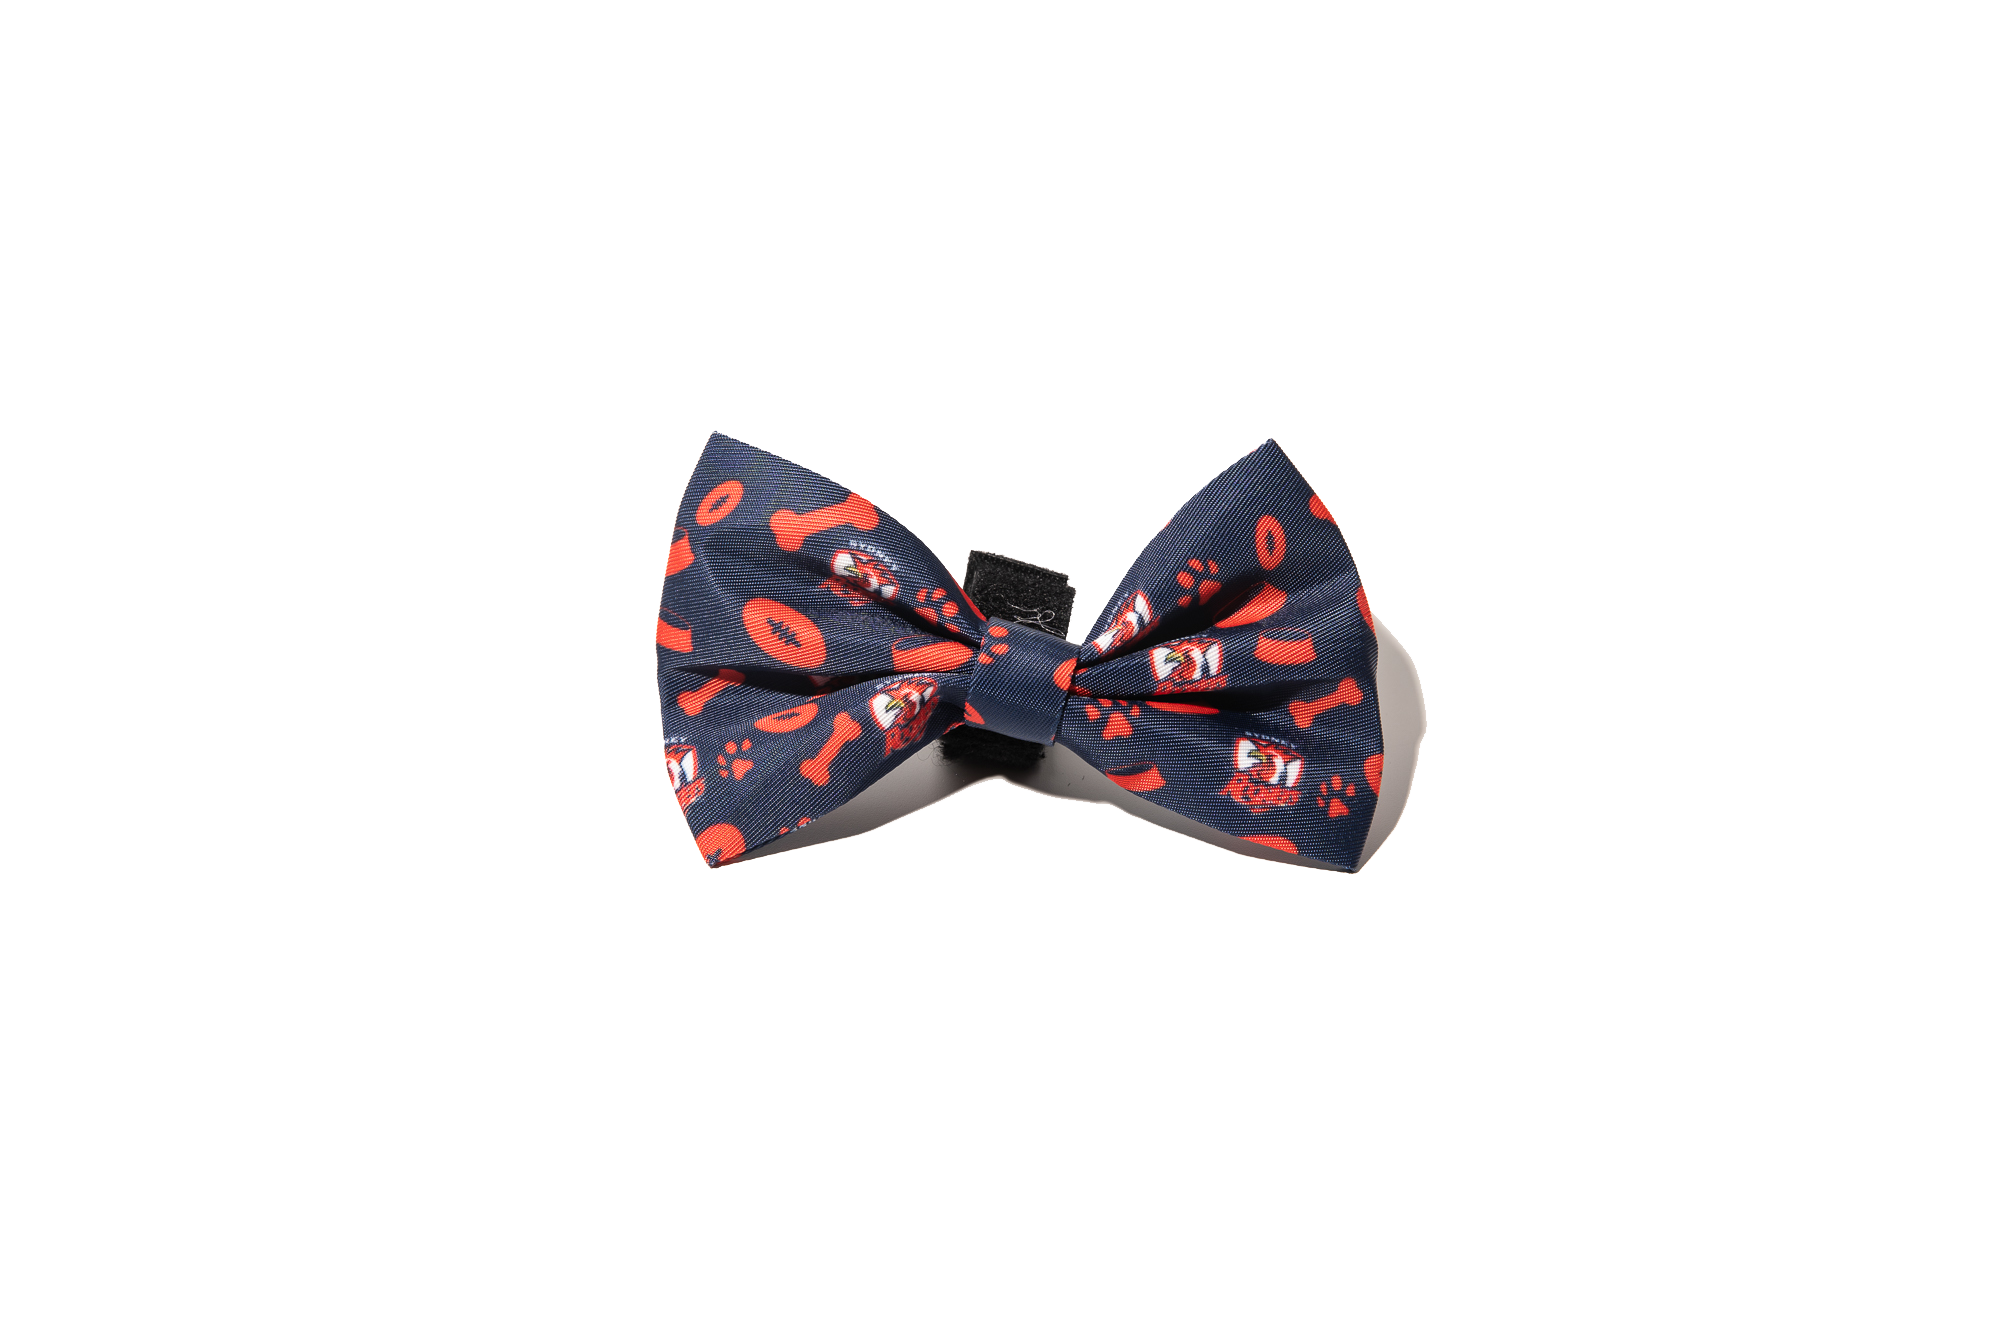 Sydney Roosters NRL Dog Bowtie